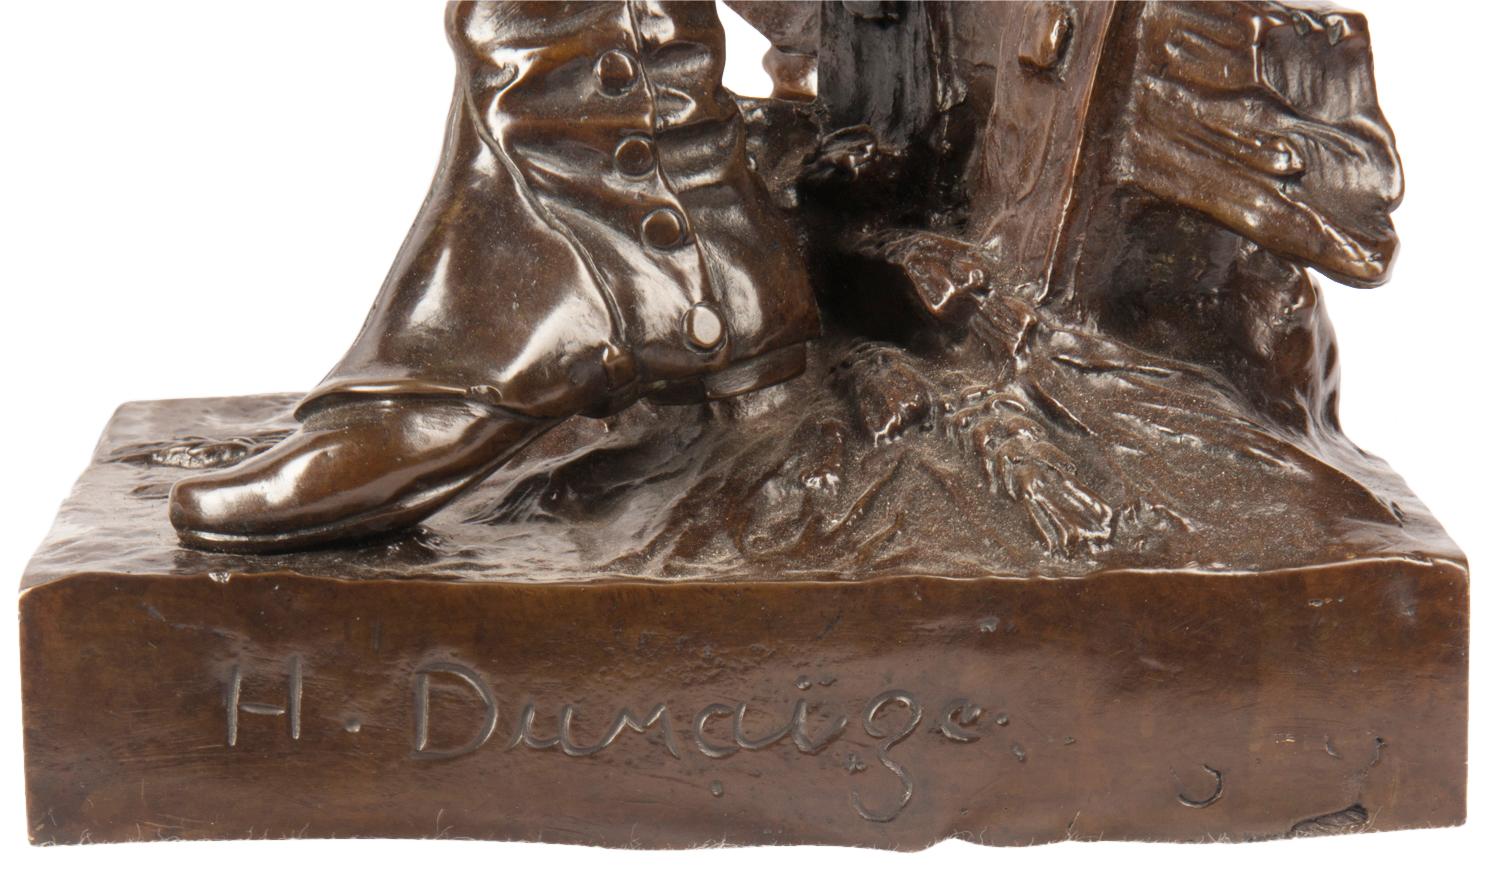 H. Dumaige Pair of 19th Century French Bronze Soldiers For Sale 7